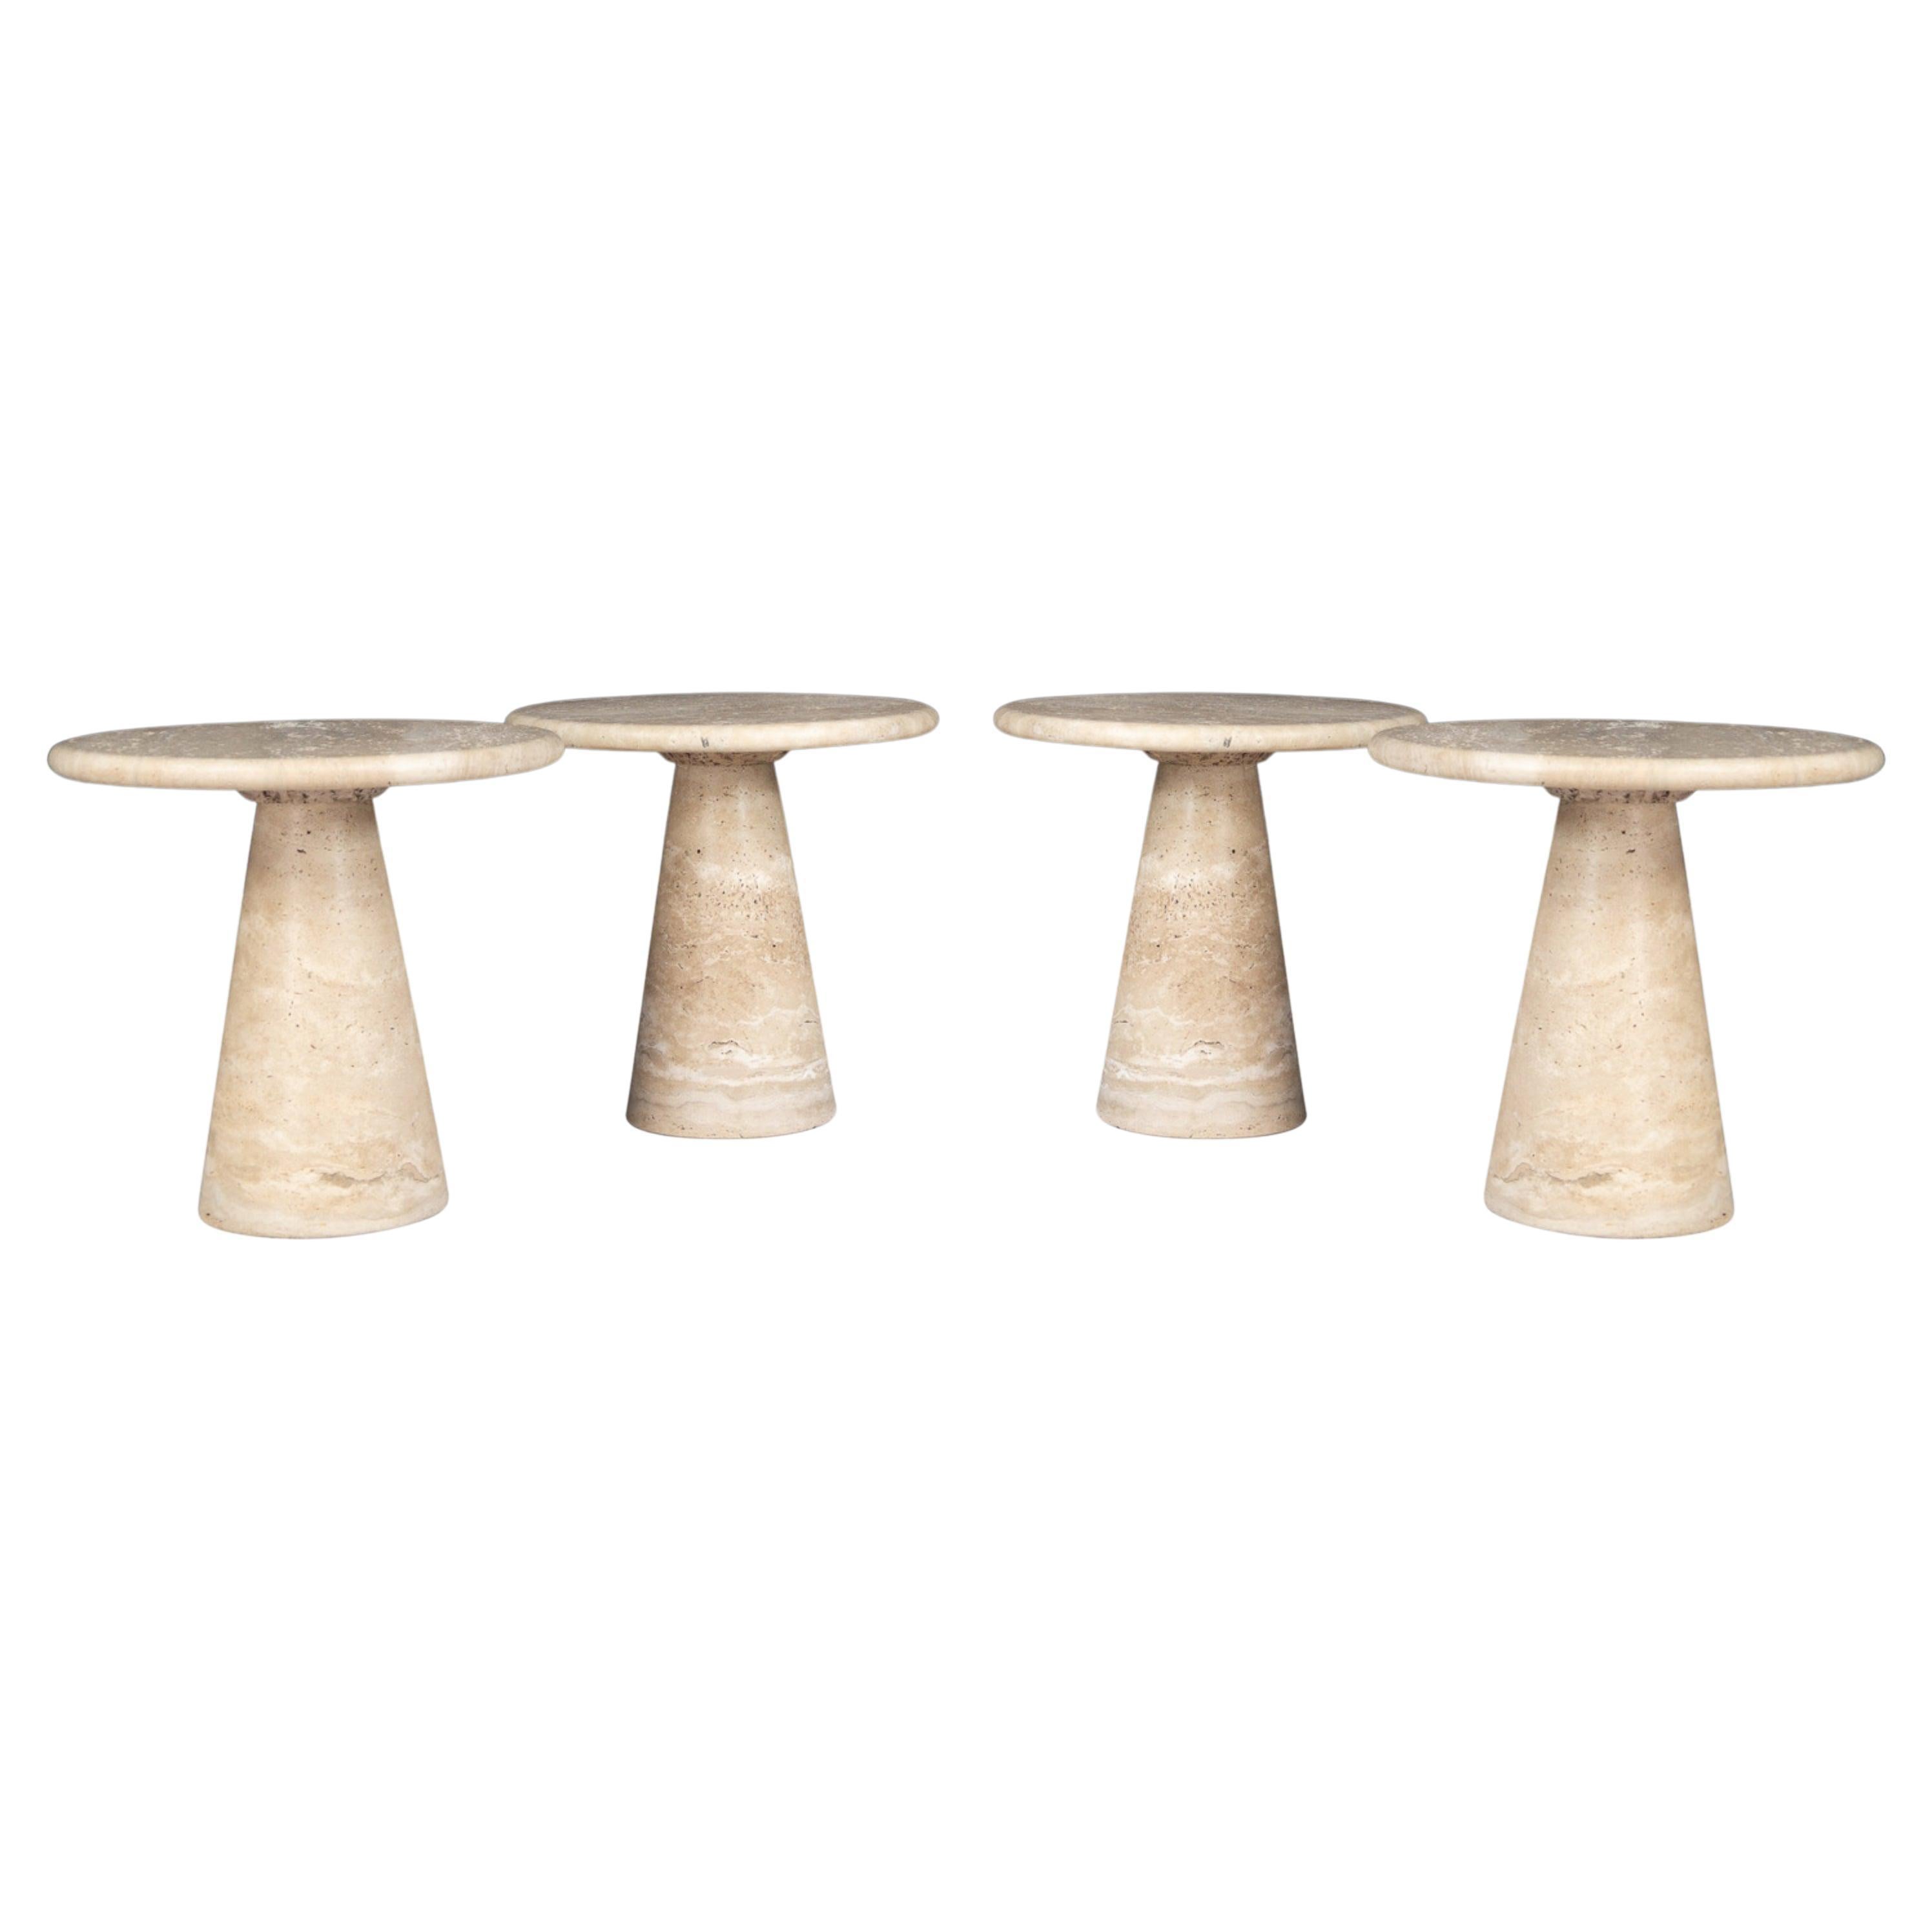  Travertine Circular Side Tables or Coffee Tables, Italy, 1980s  For Sale